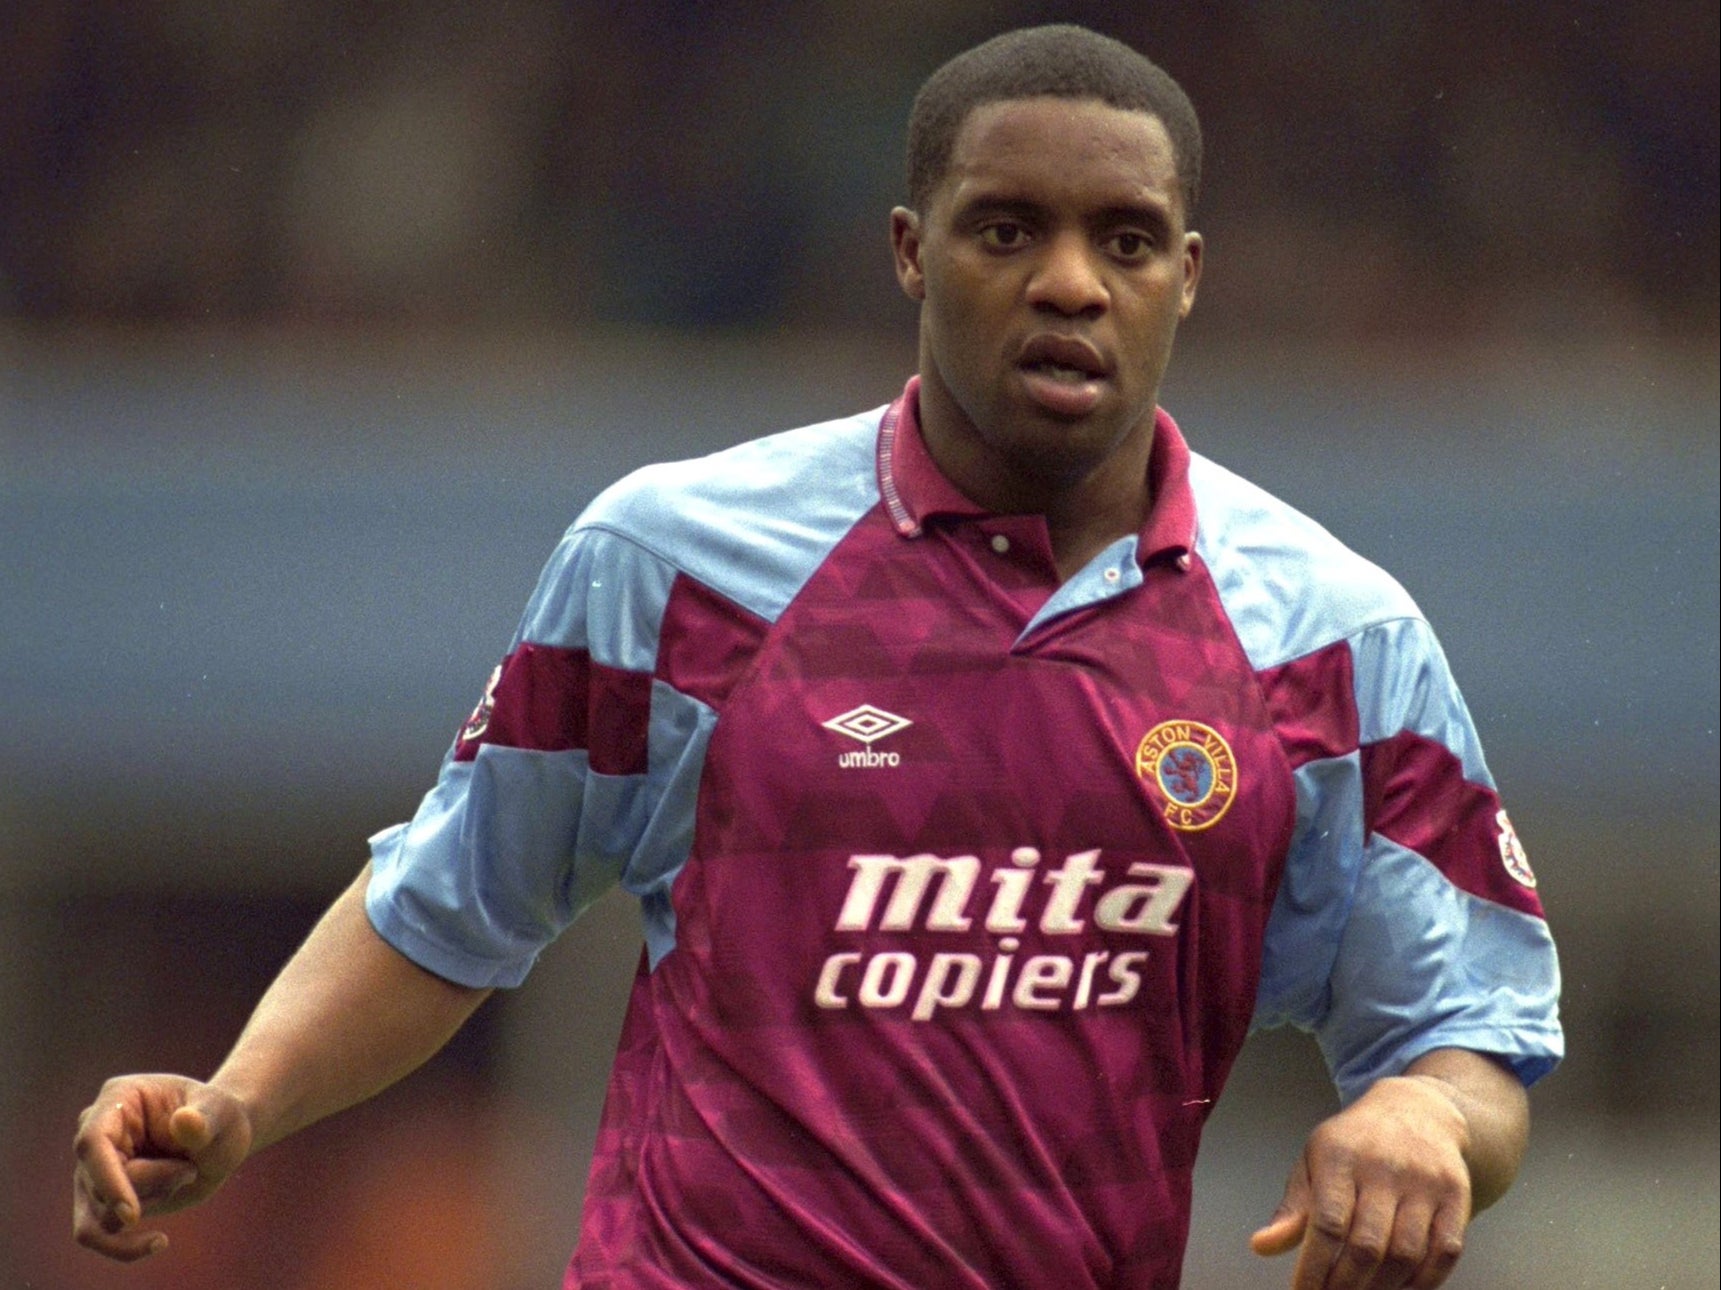 A witness has told a trial she feared ex-footballer Dalian Atkinson was dead as a police officer repeatedly ‘stamped’ on his head